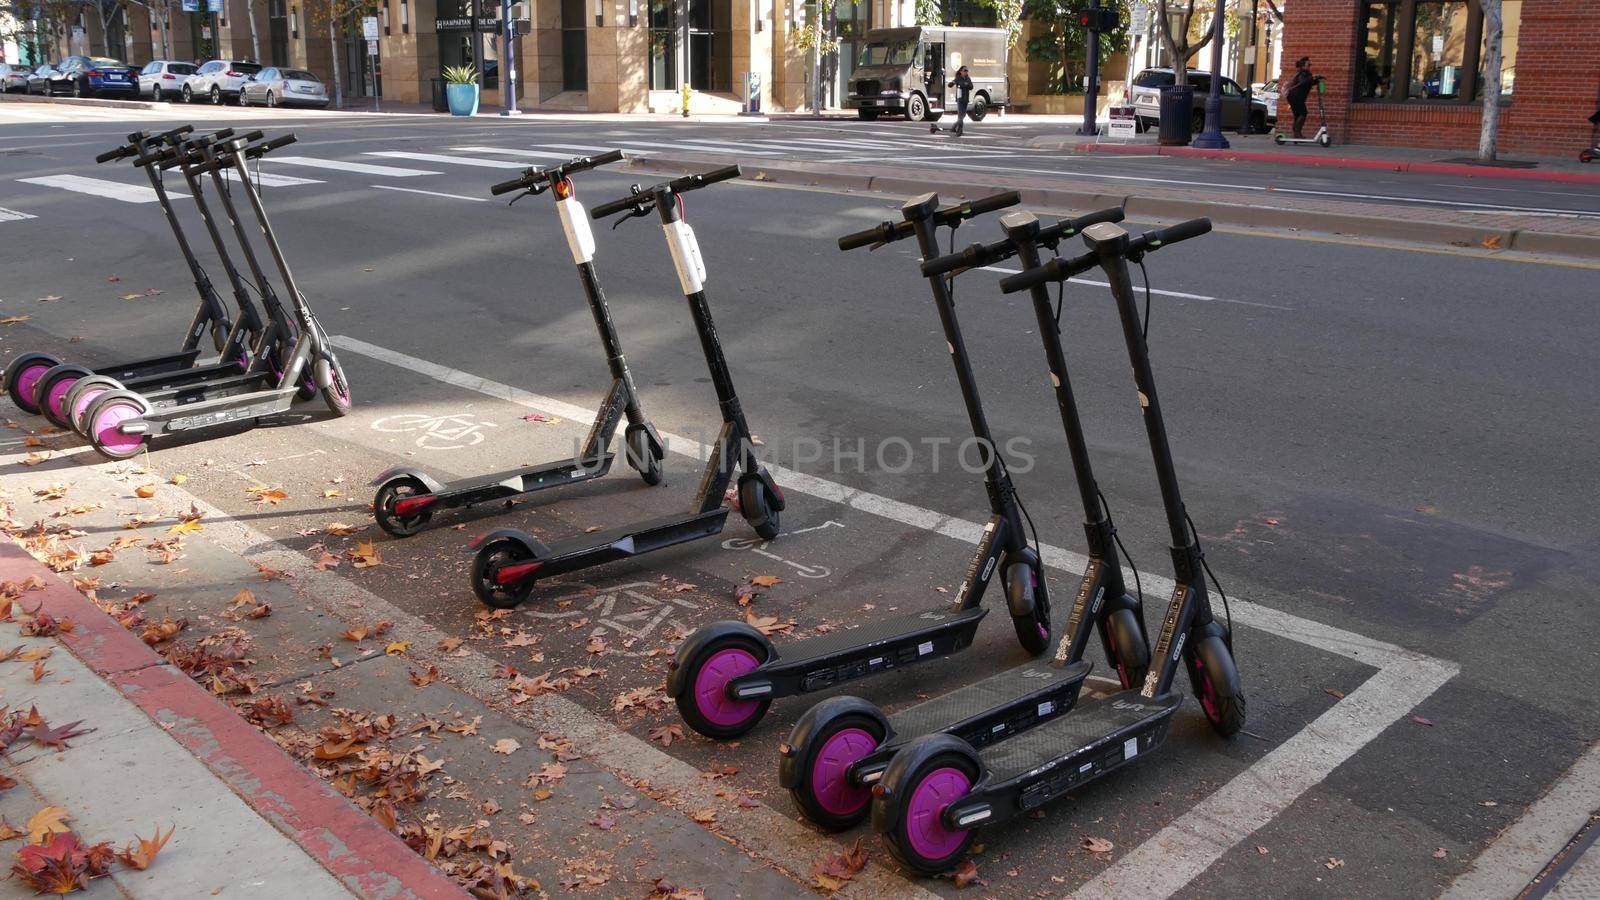 SAN DIEGO, CALIFORNIA USA - 4 JAN 2020: Row of ride sharing electric scooters parked on street in Gaslamp Quarter. Rental dockless public bikes, eco transport in city. Rent kick cycle with mobile app.